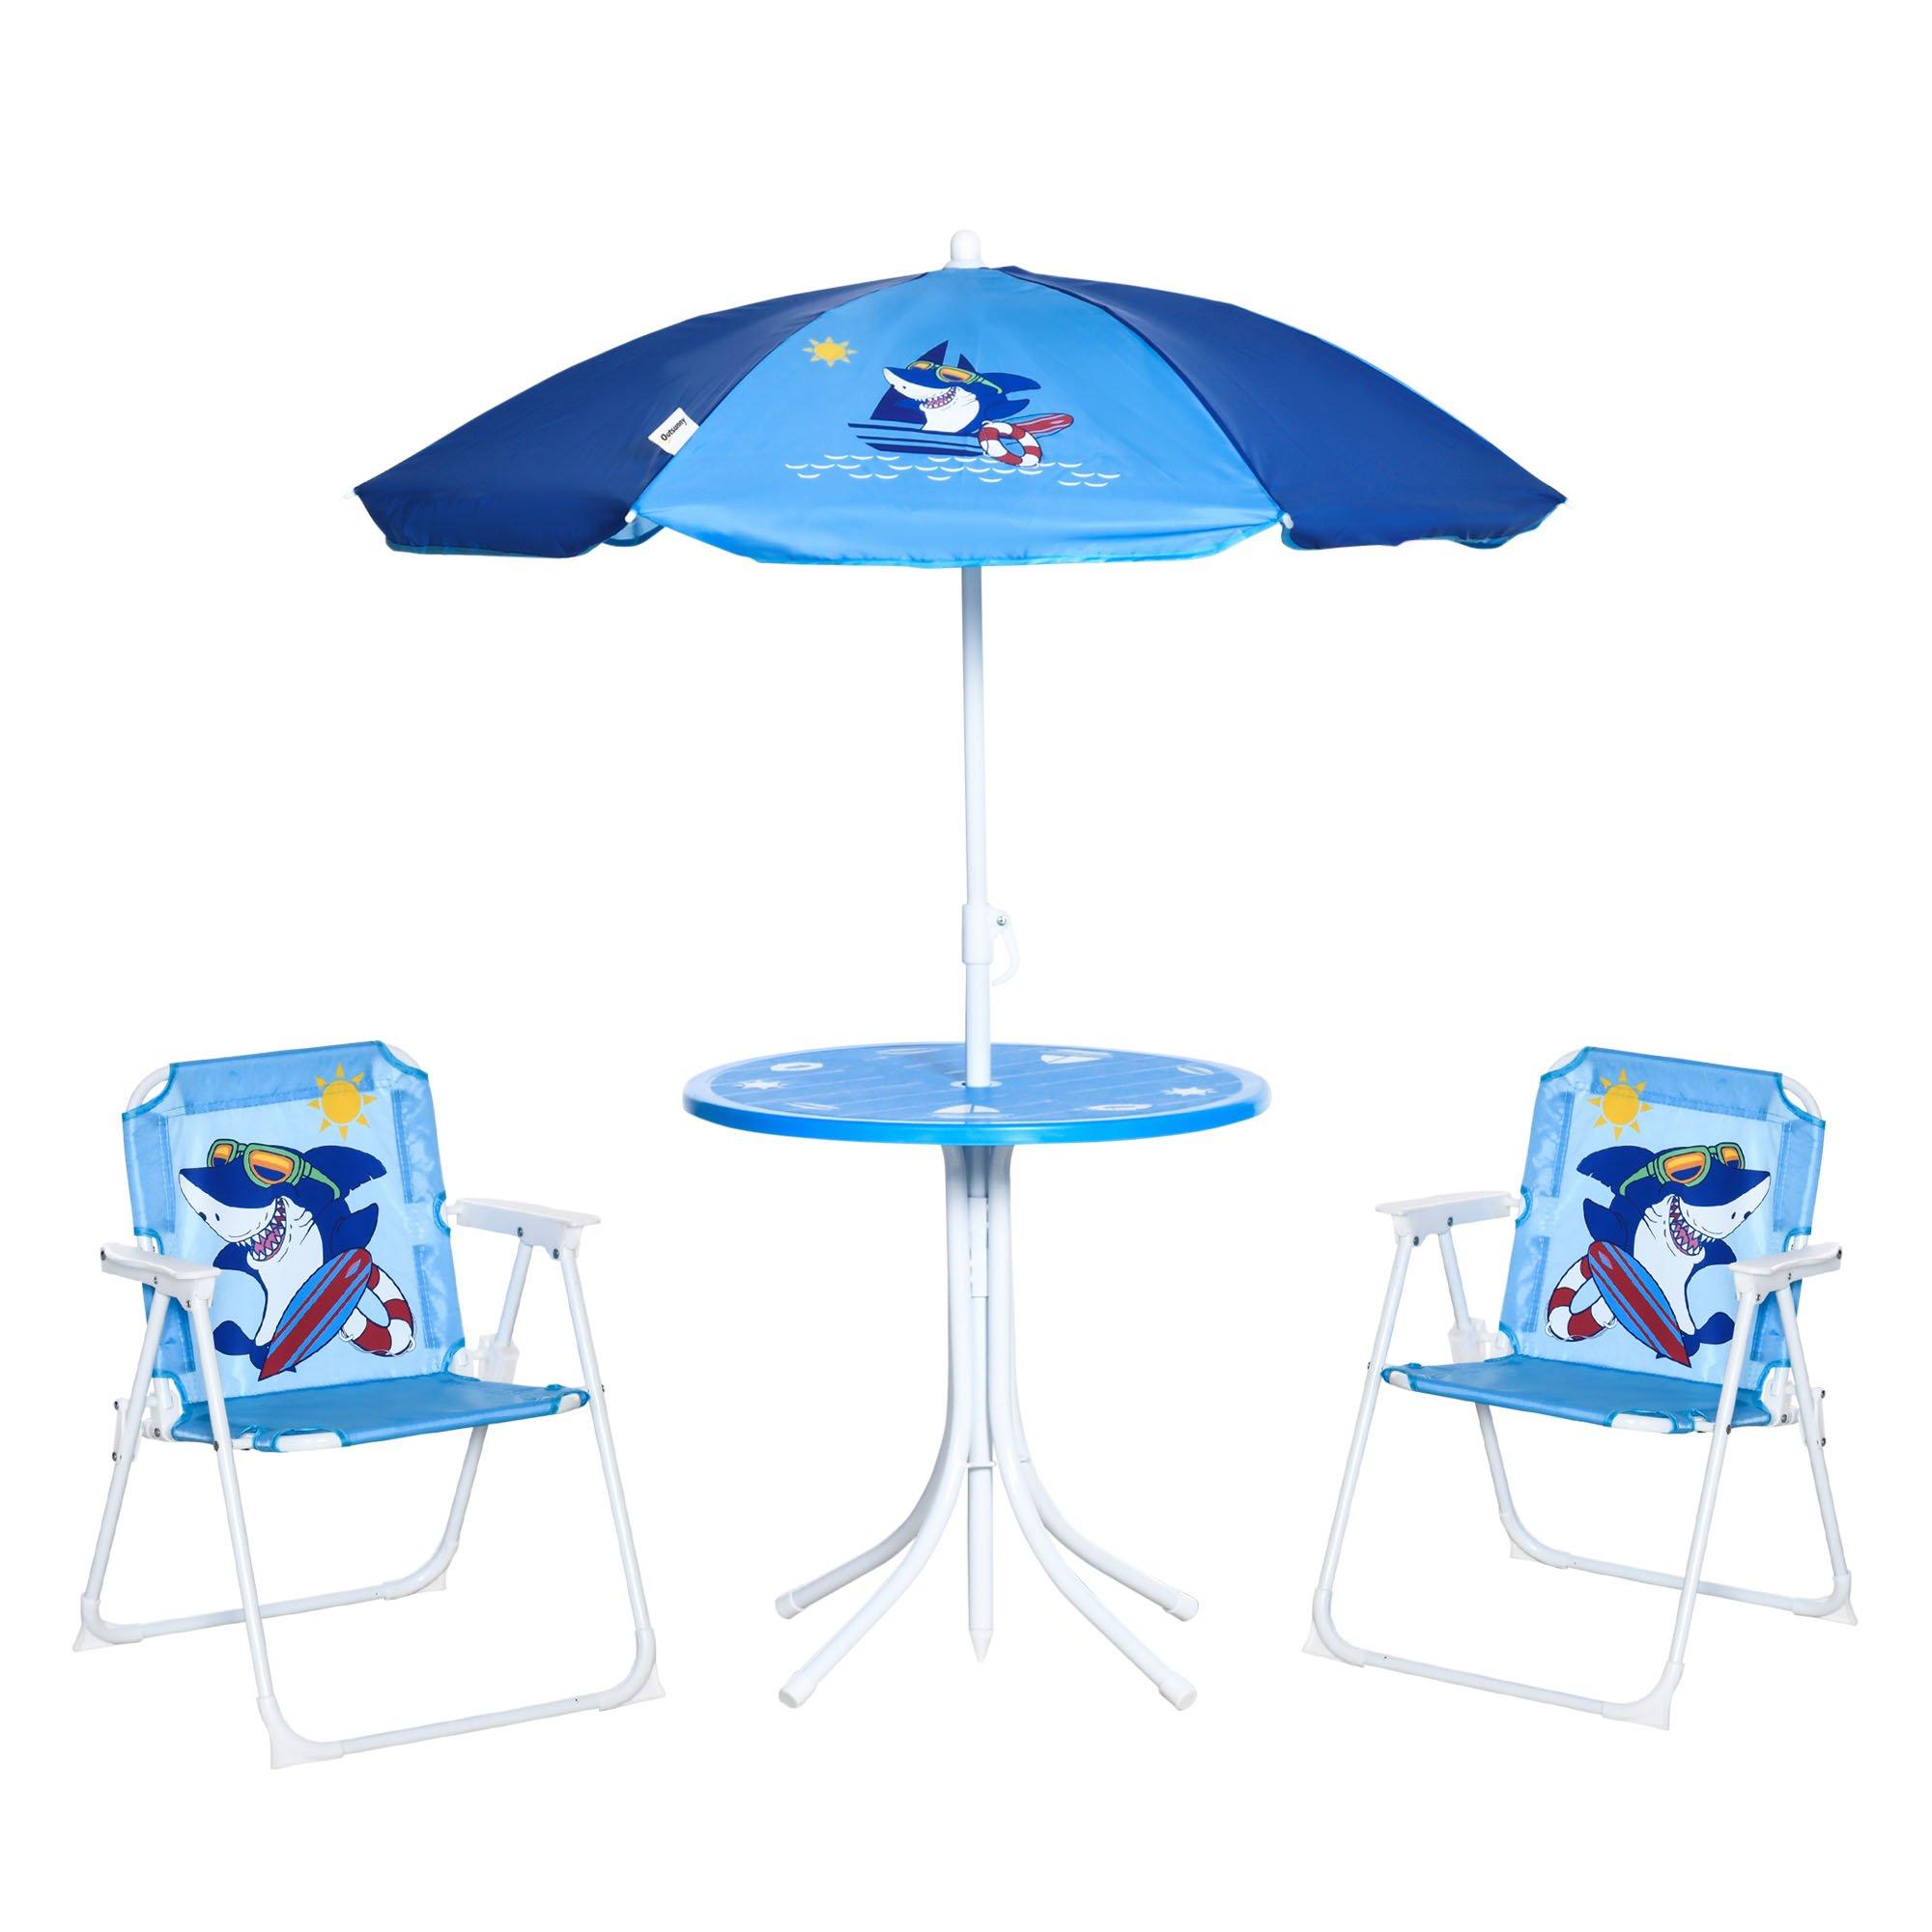 Kids Foldable Four-Piece Garden Set with Table, Chairs, Adjustable Umbrella - Blue